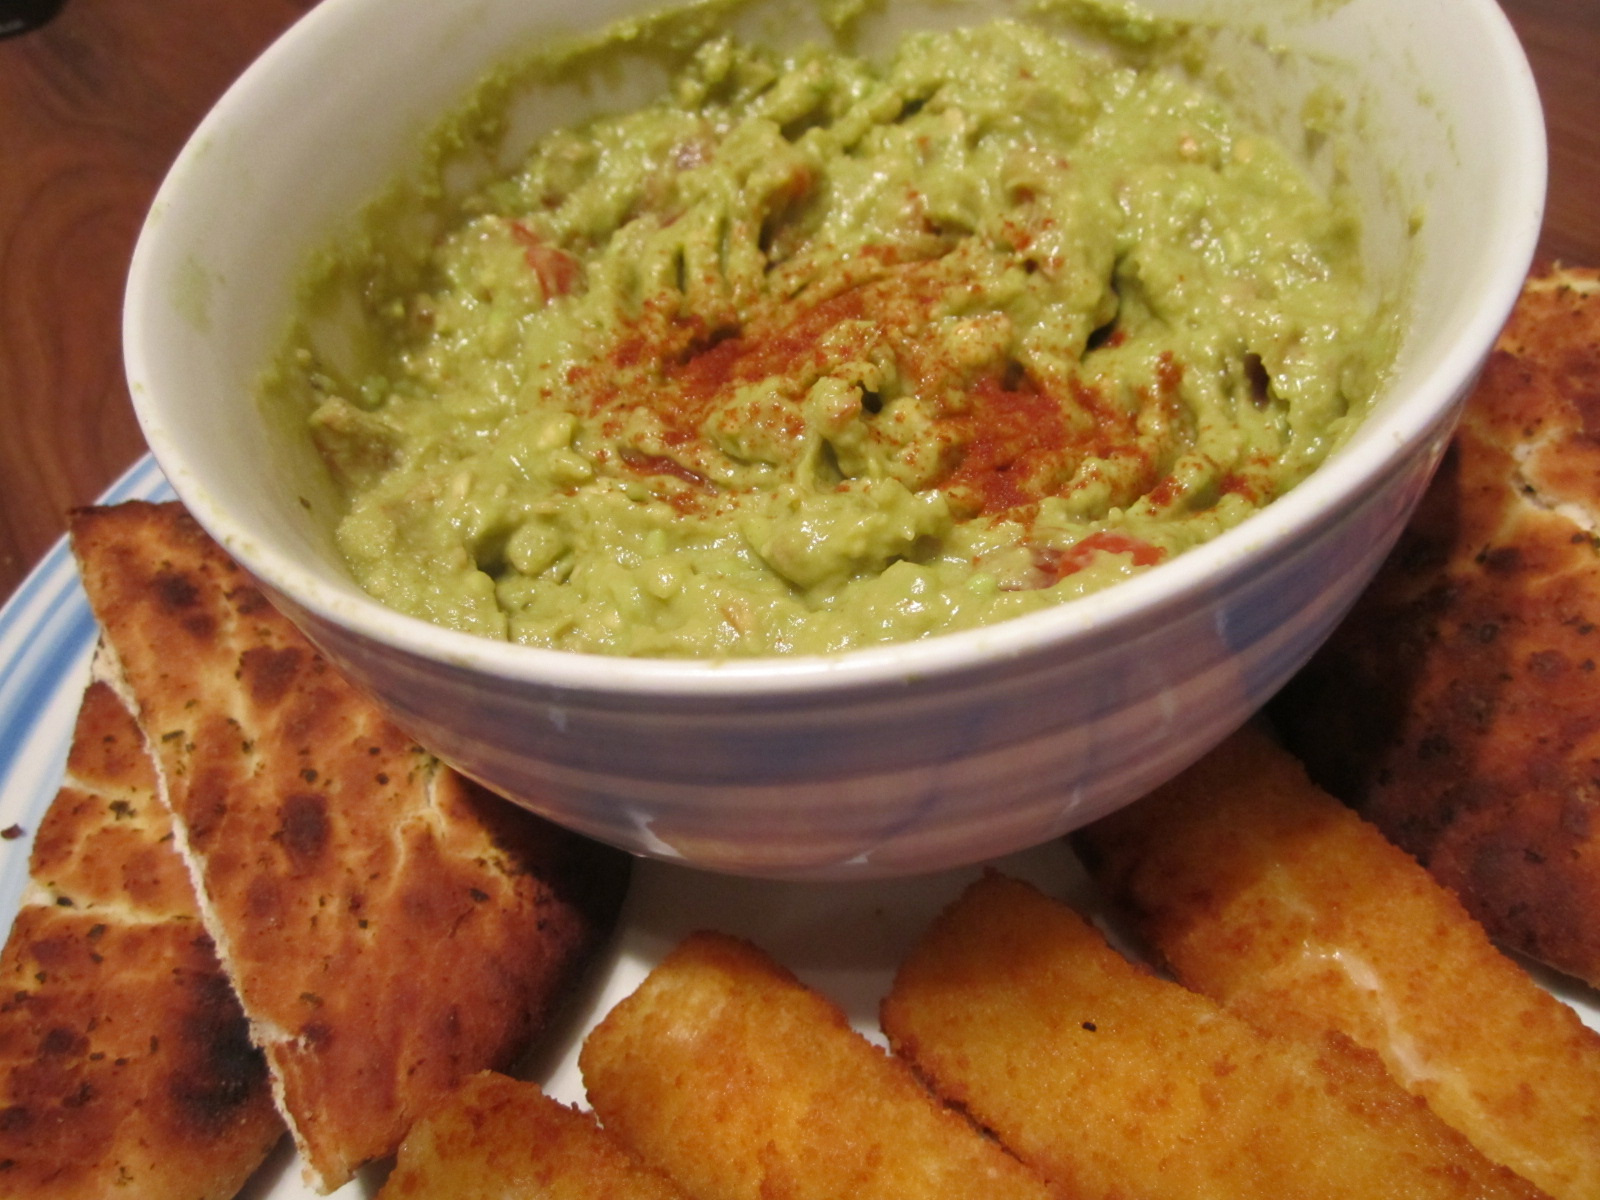 a white plate with some breadsticks and guacamole in it